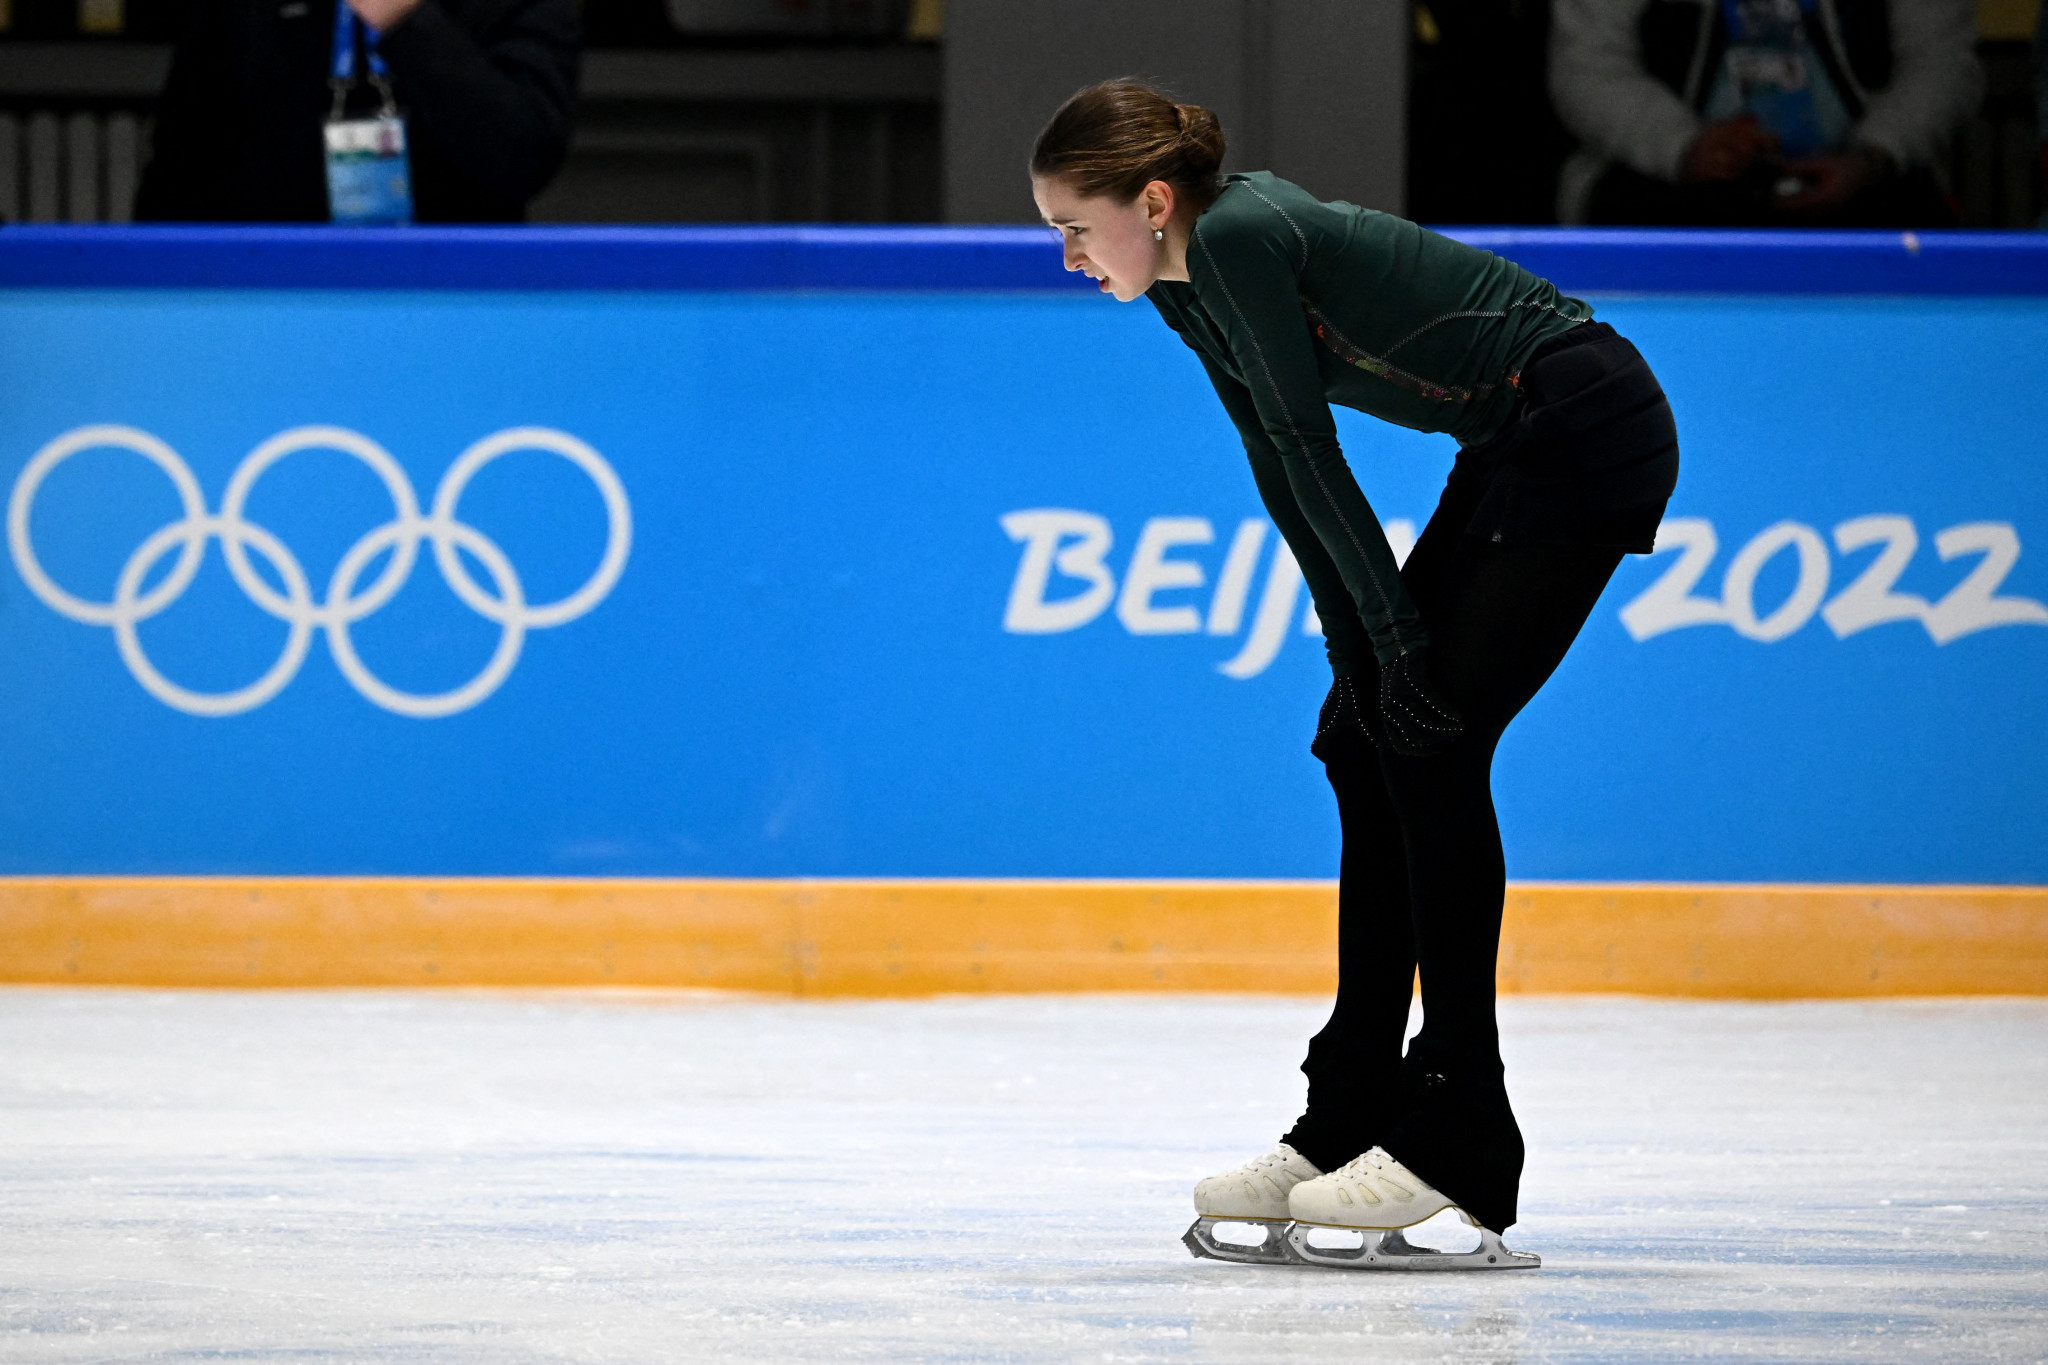 Figure skater Kamila Valieva of the Russian Olympic Committee trained today, as the International Testing Agency confirmed it would appeal a decision to lift a provisional suspension imposed on her in connection with a positive drugs test ©Getty Images